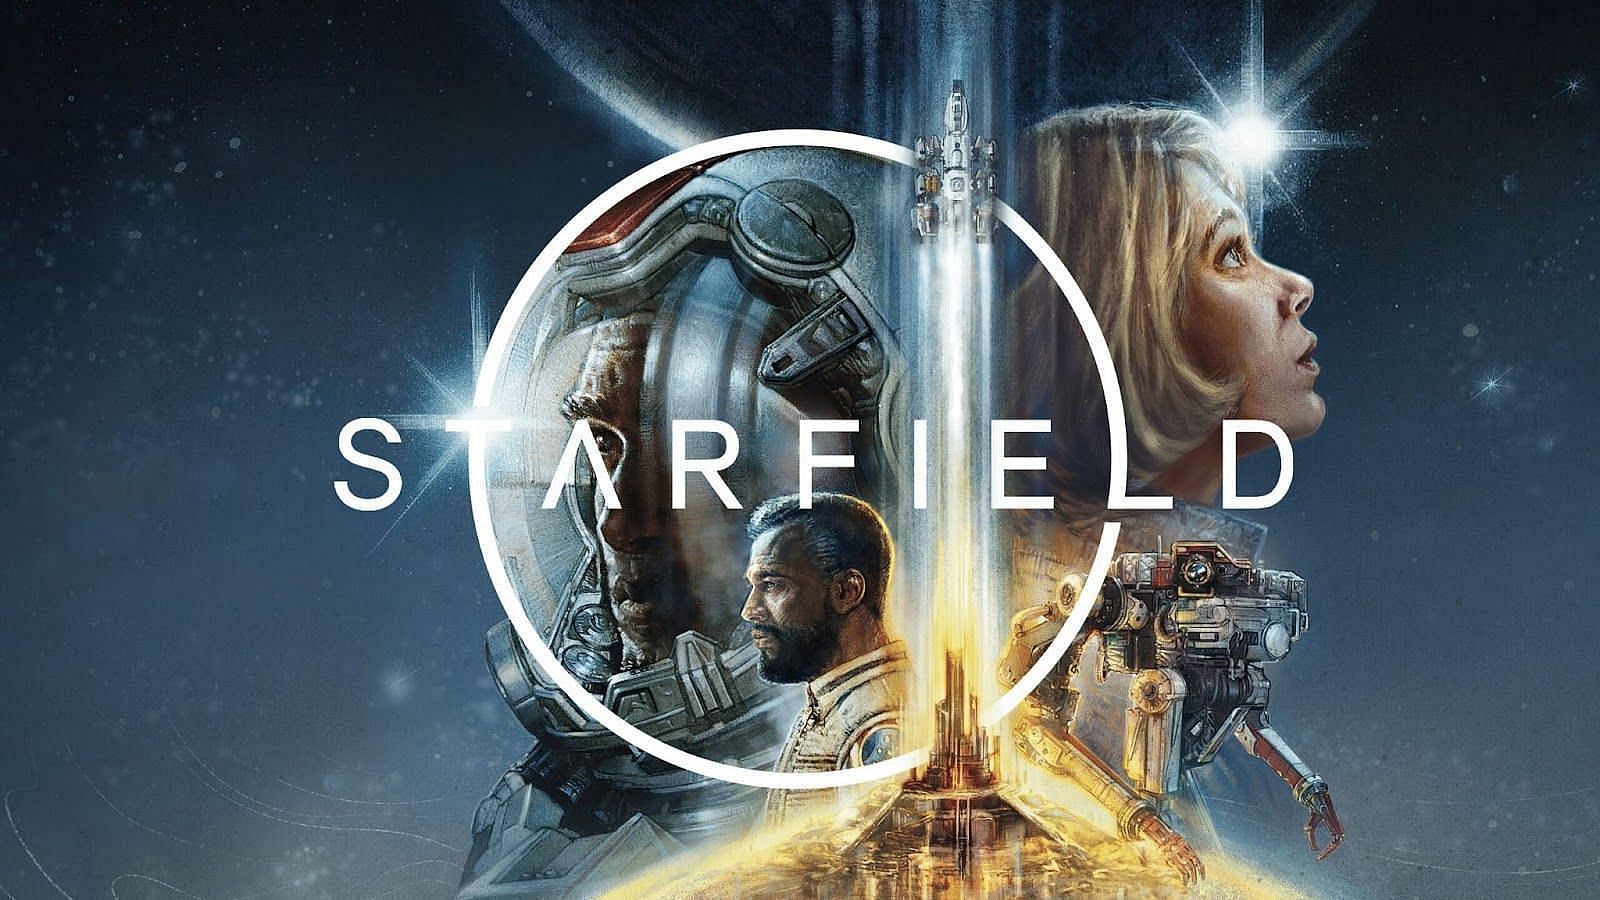 Starfield: An Upcoming Action Role-Playing Game Set in Space